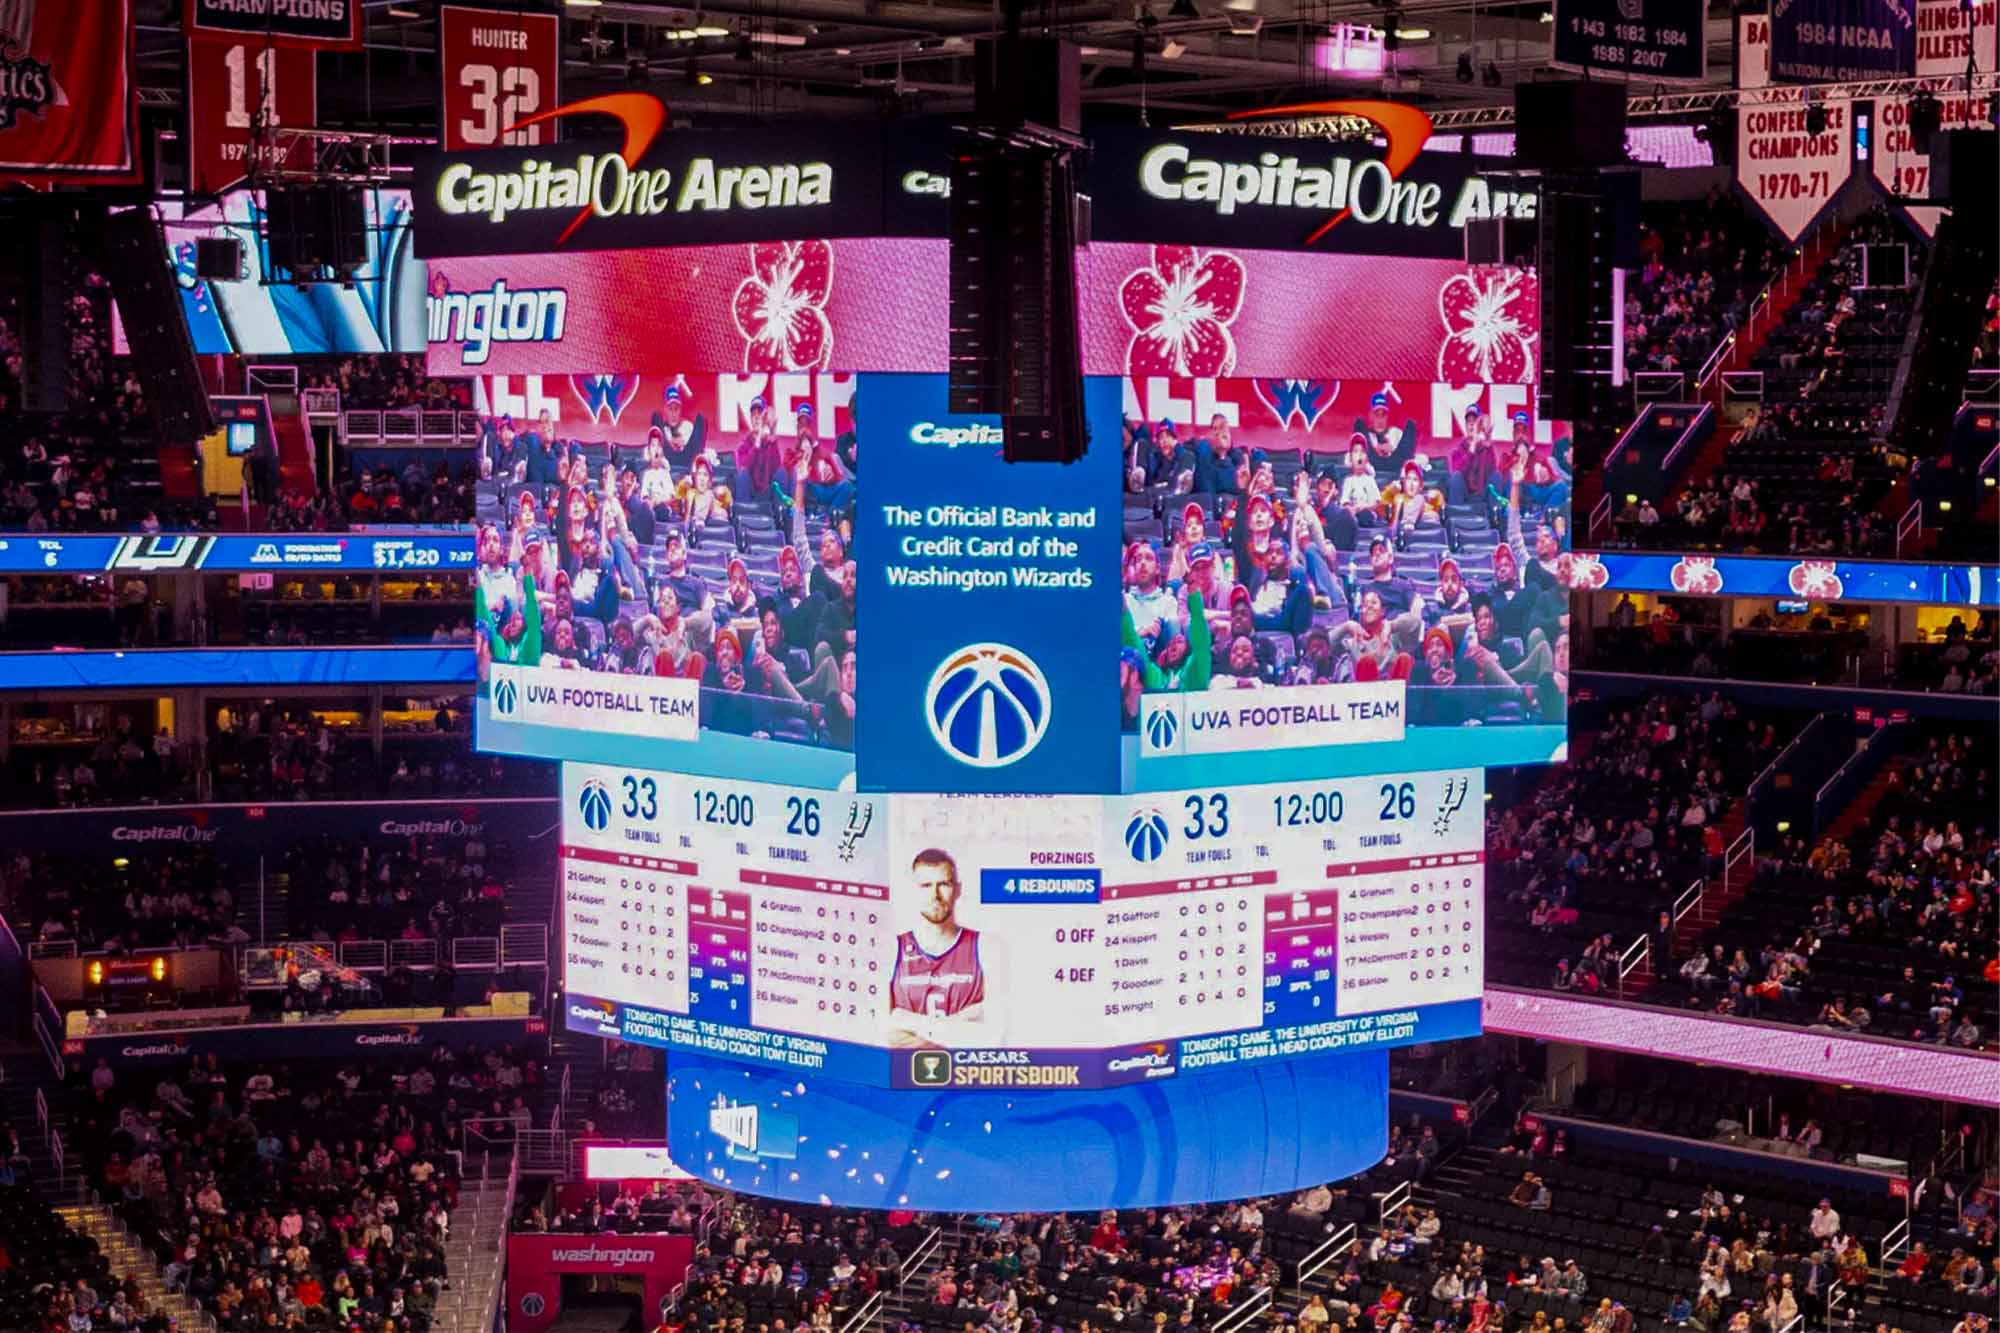 The center court display at a Washington Wizards game